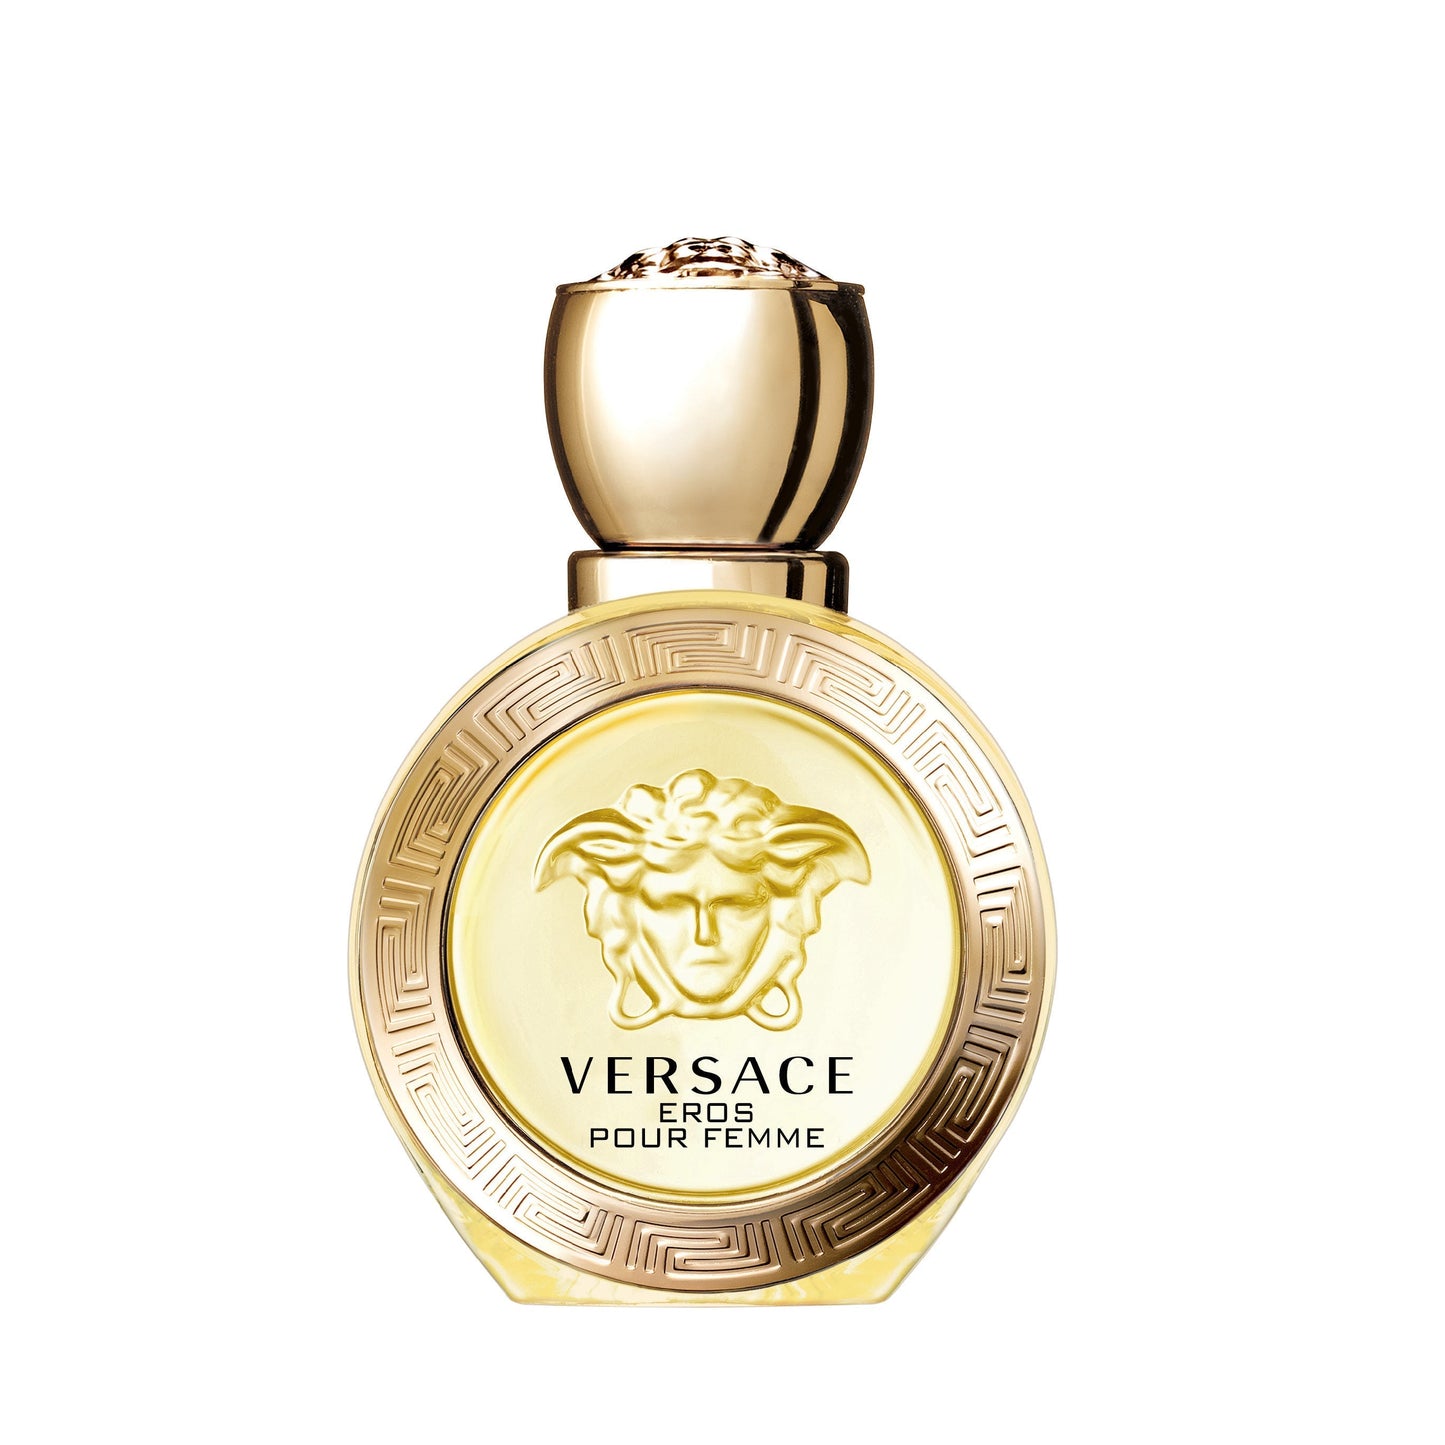 Versace Eros Pour Femme EDT50 ML on a white background